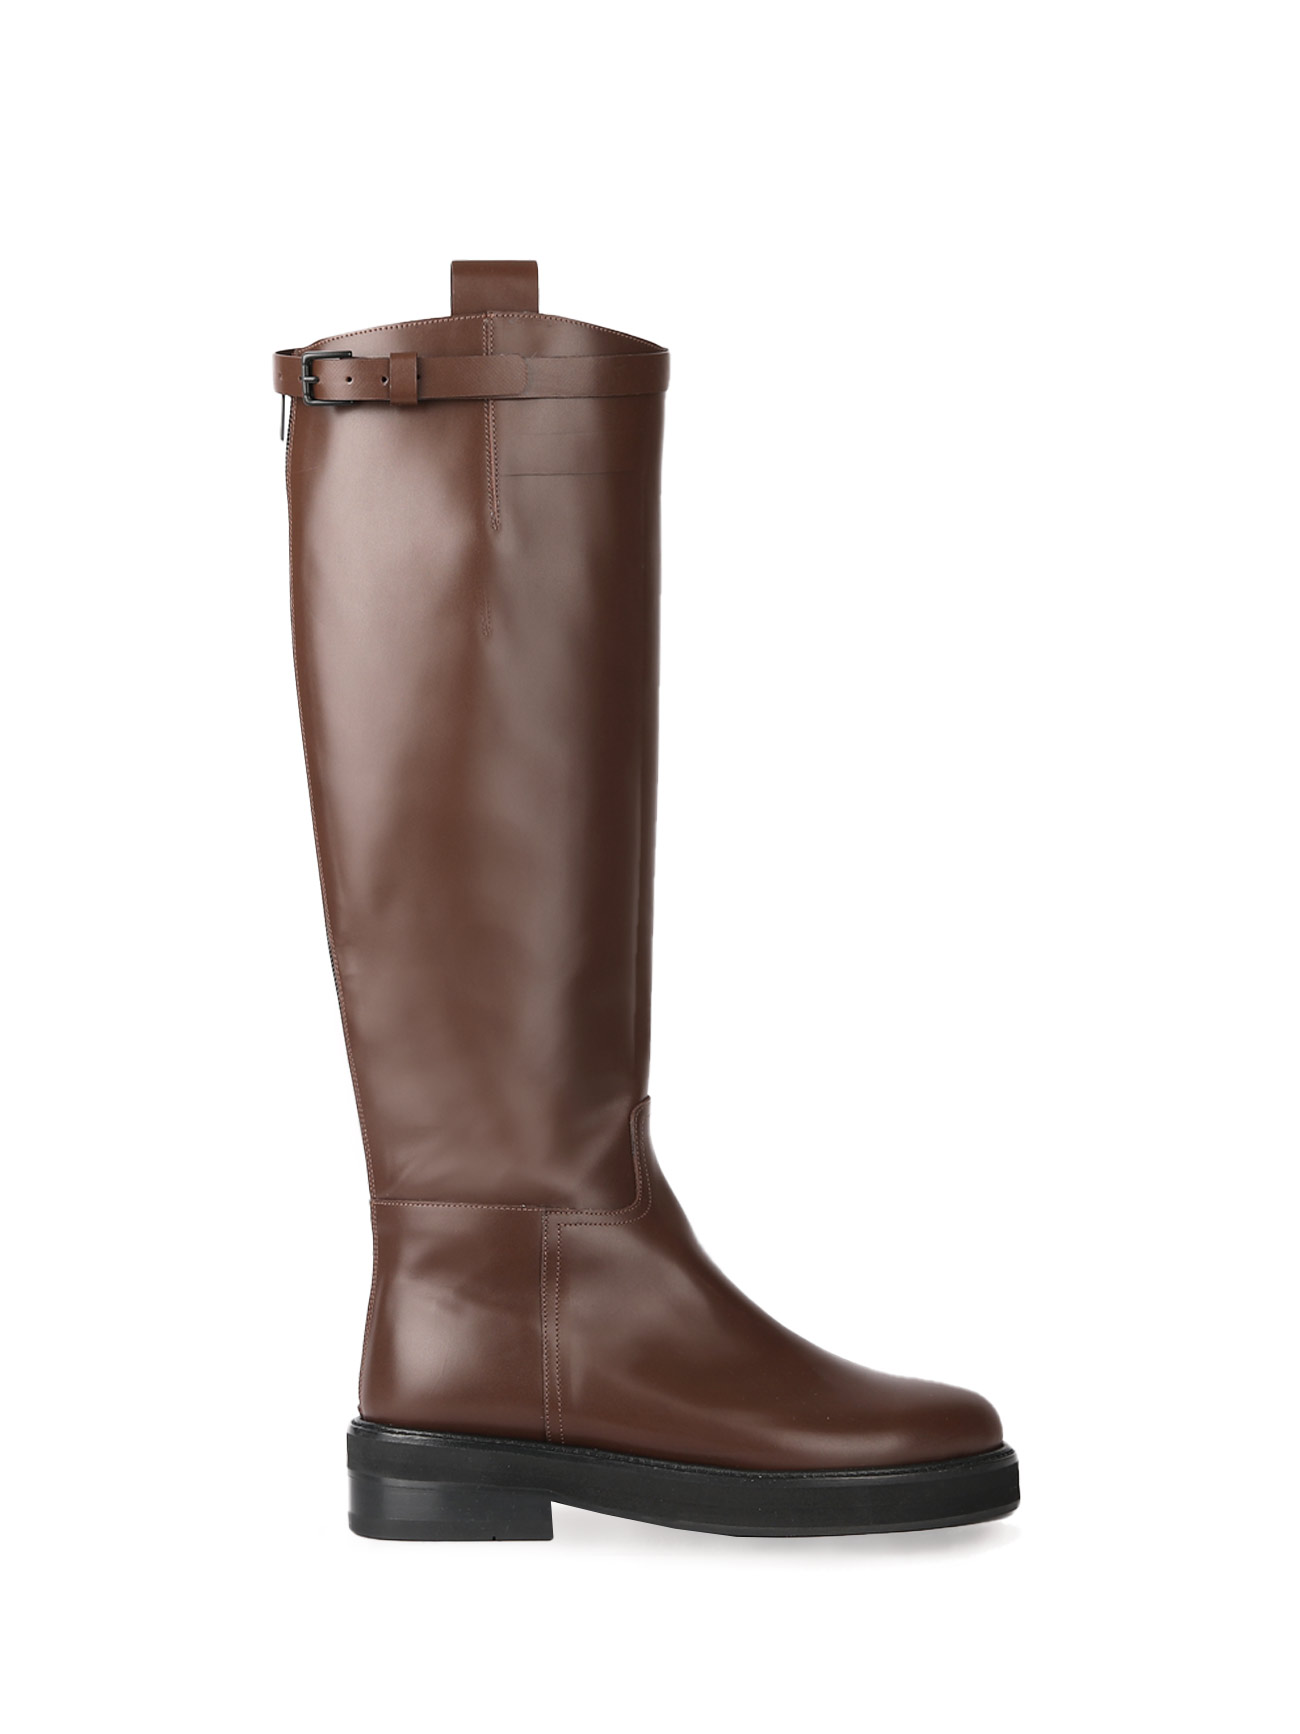 JOY BUCKLE STRAP LEATHER BOOTS - CHOCO